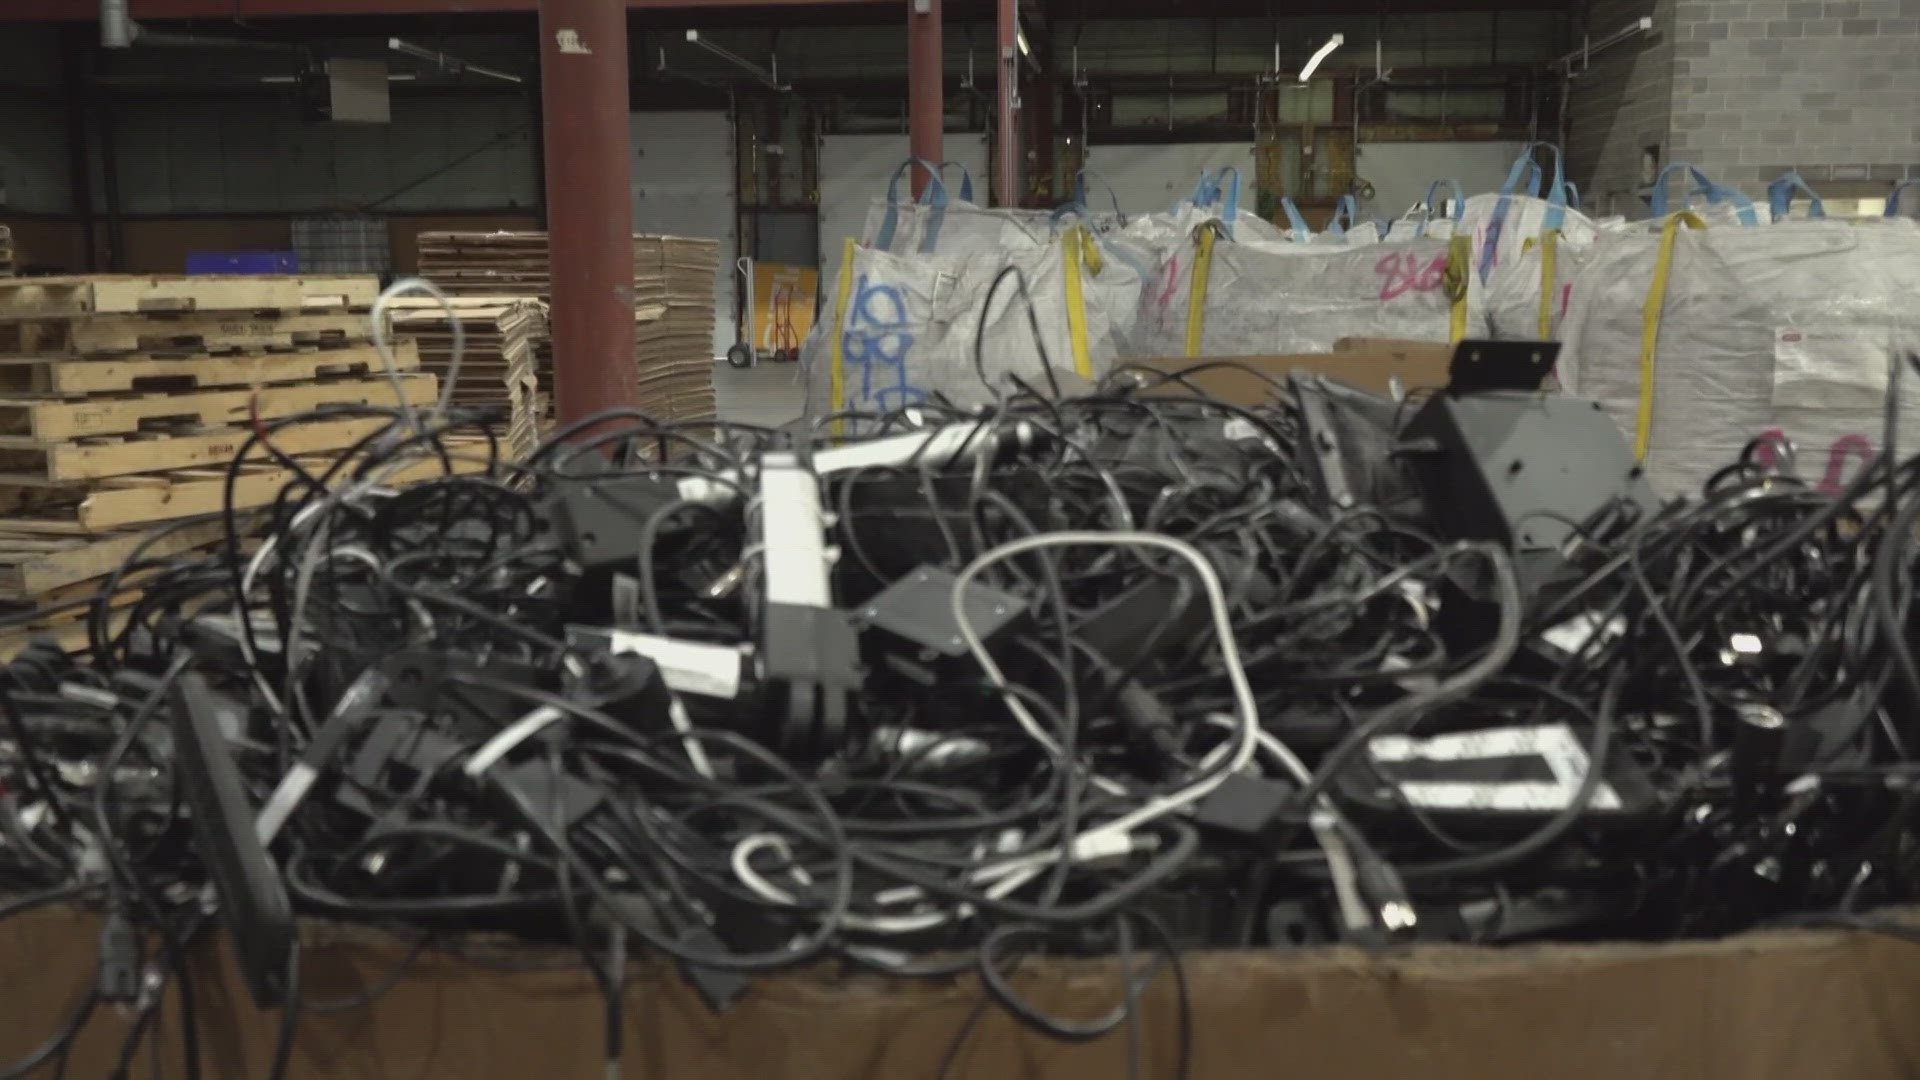 Kelly Greene explains what you can do with old electronics and how one company is keeping those devices out of local landfills.